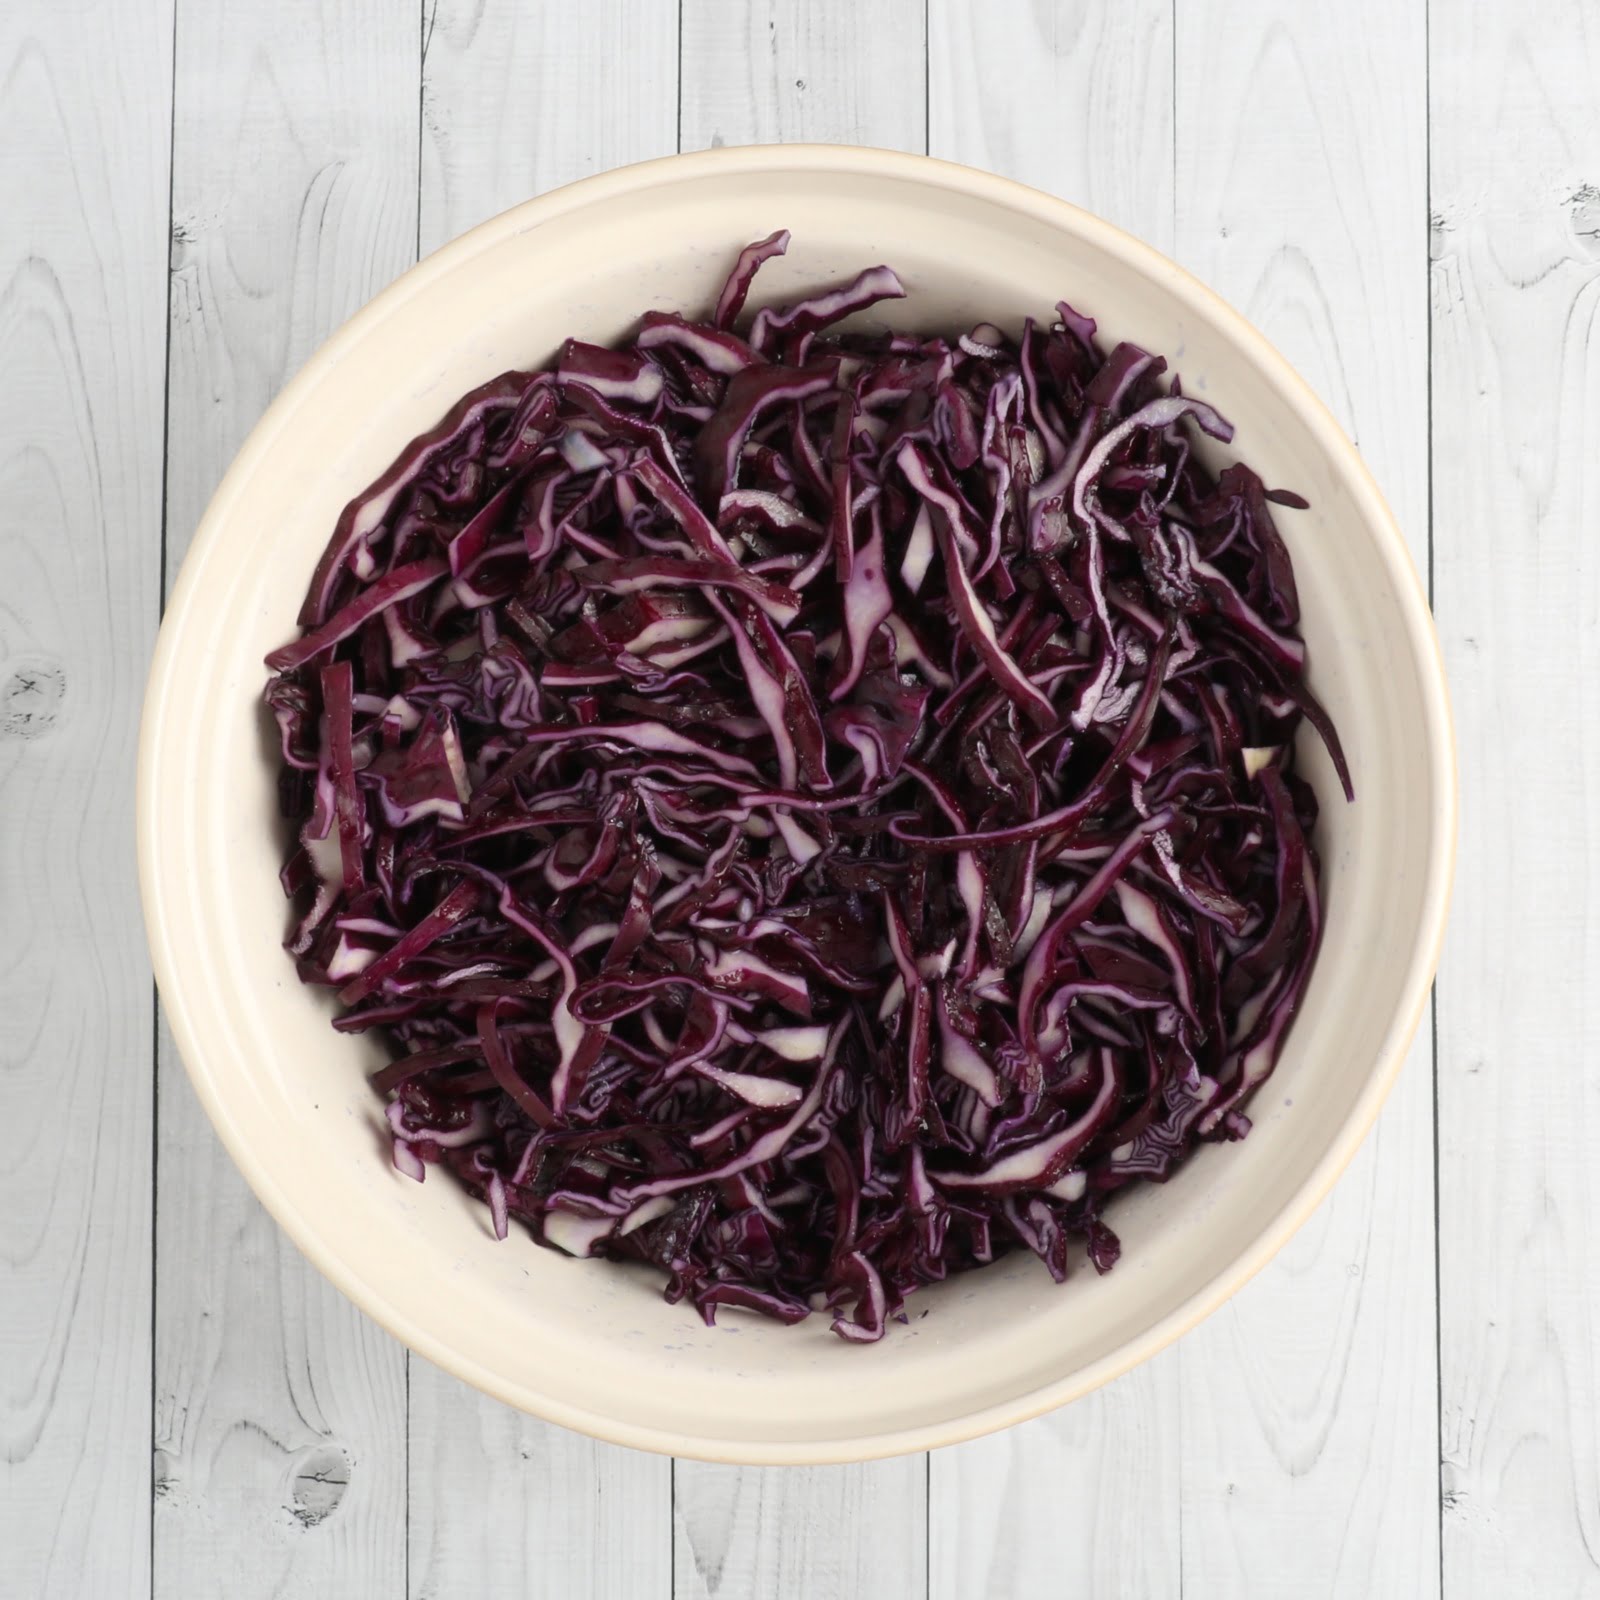 spiced red cabbage canning recipe salting the shredded cabbage